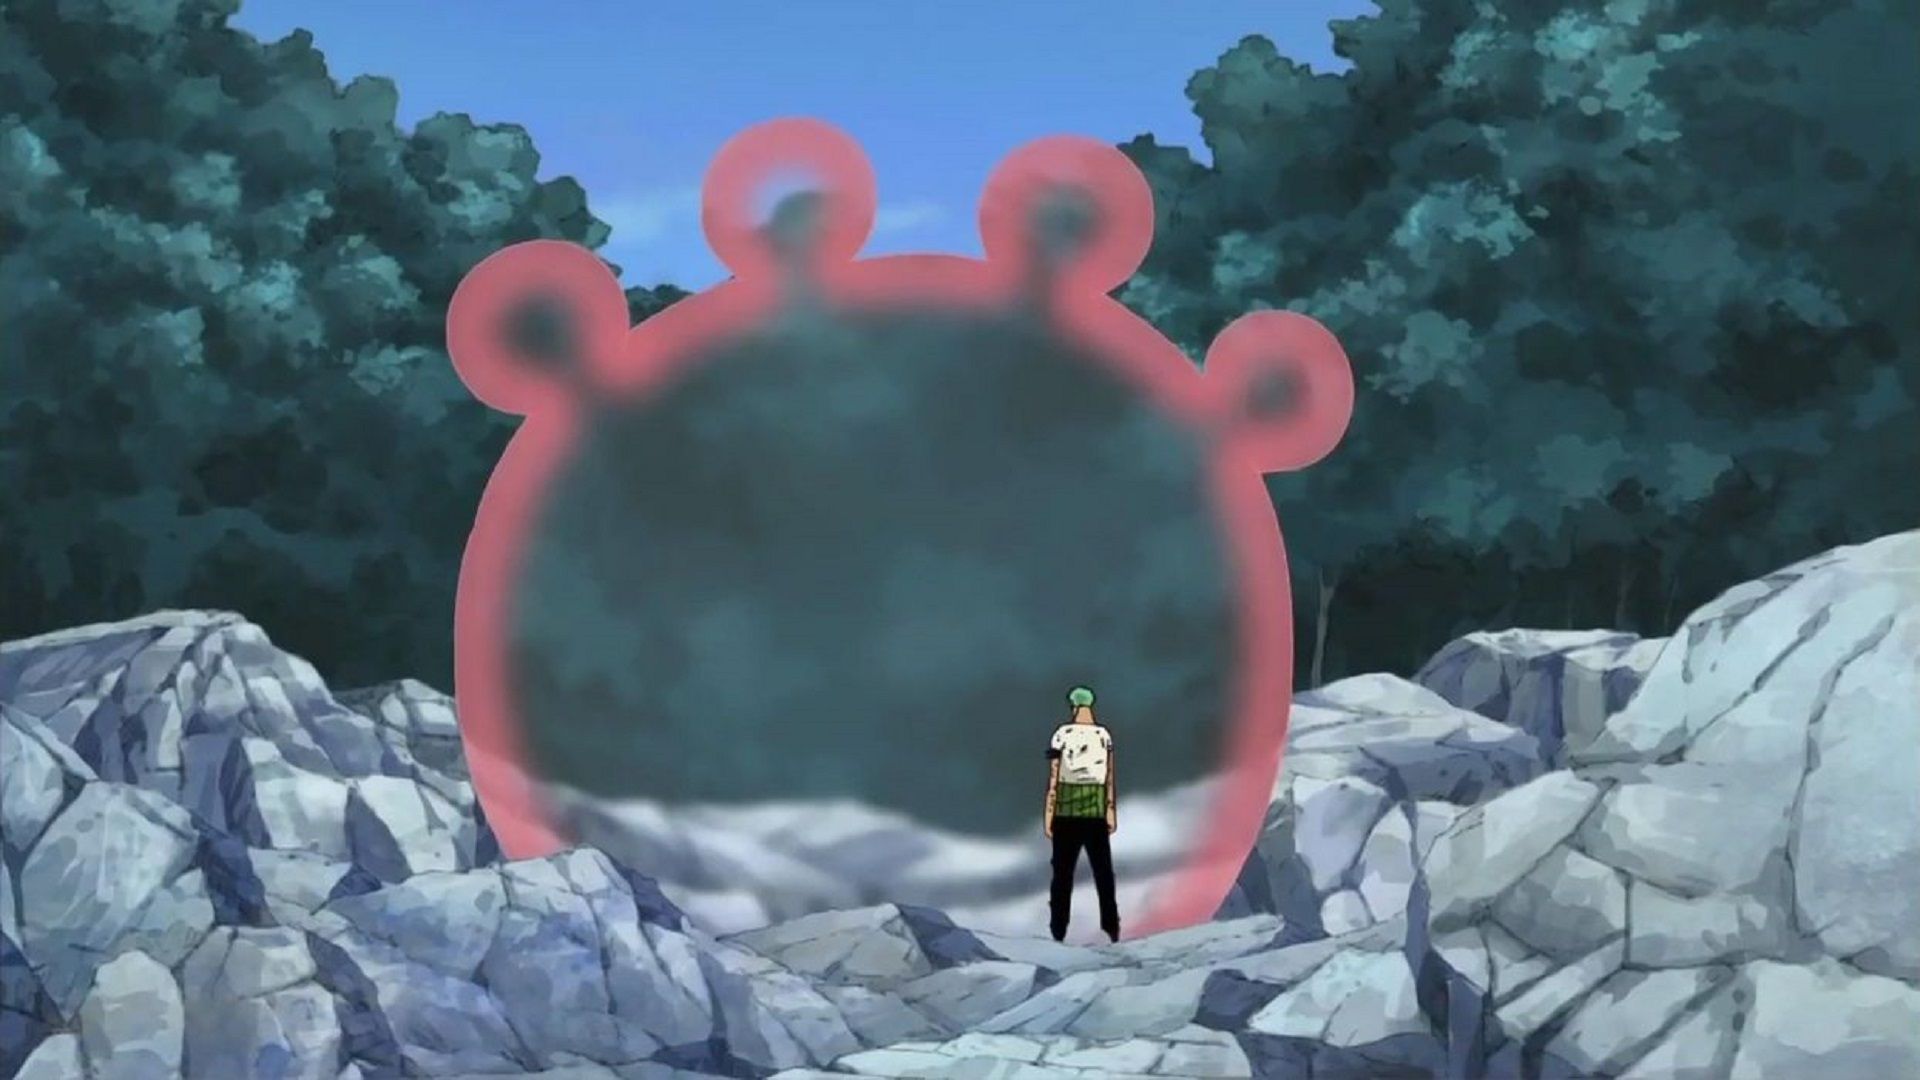 The Paw-Paw Fruit can repel incorporeal things and manifest them (Image via Toei Animation, One Piece)